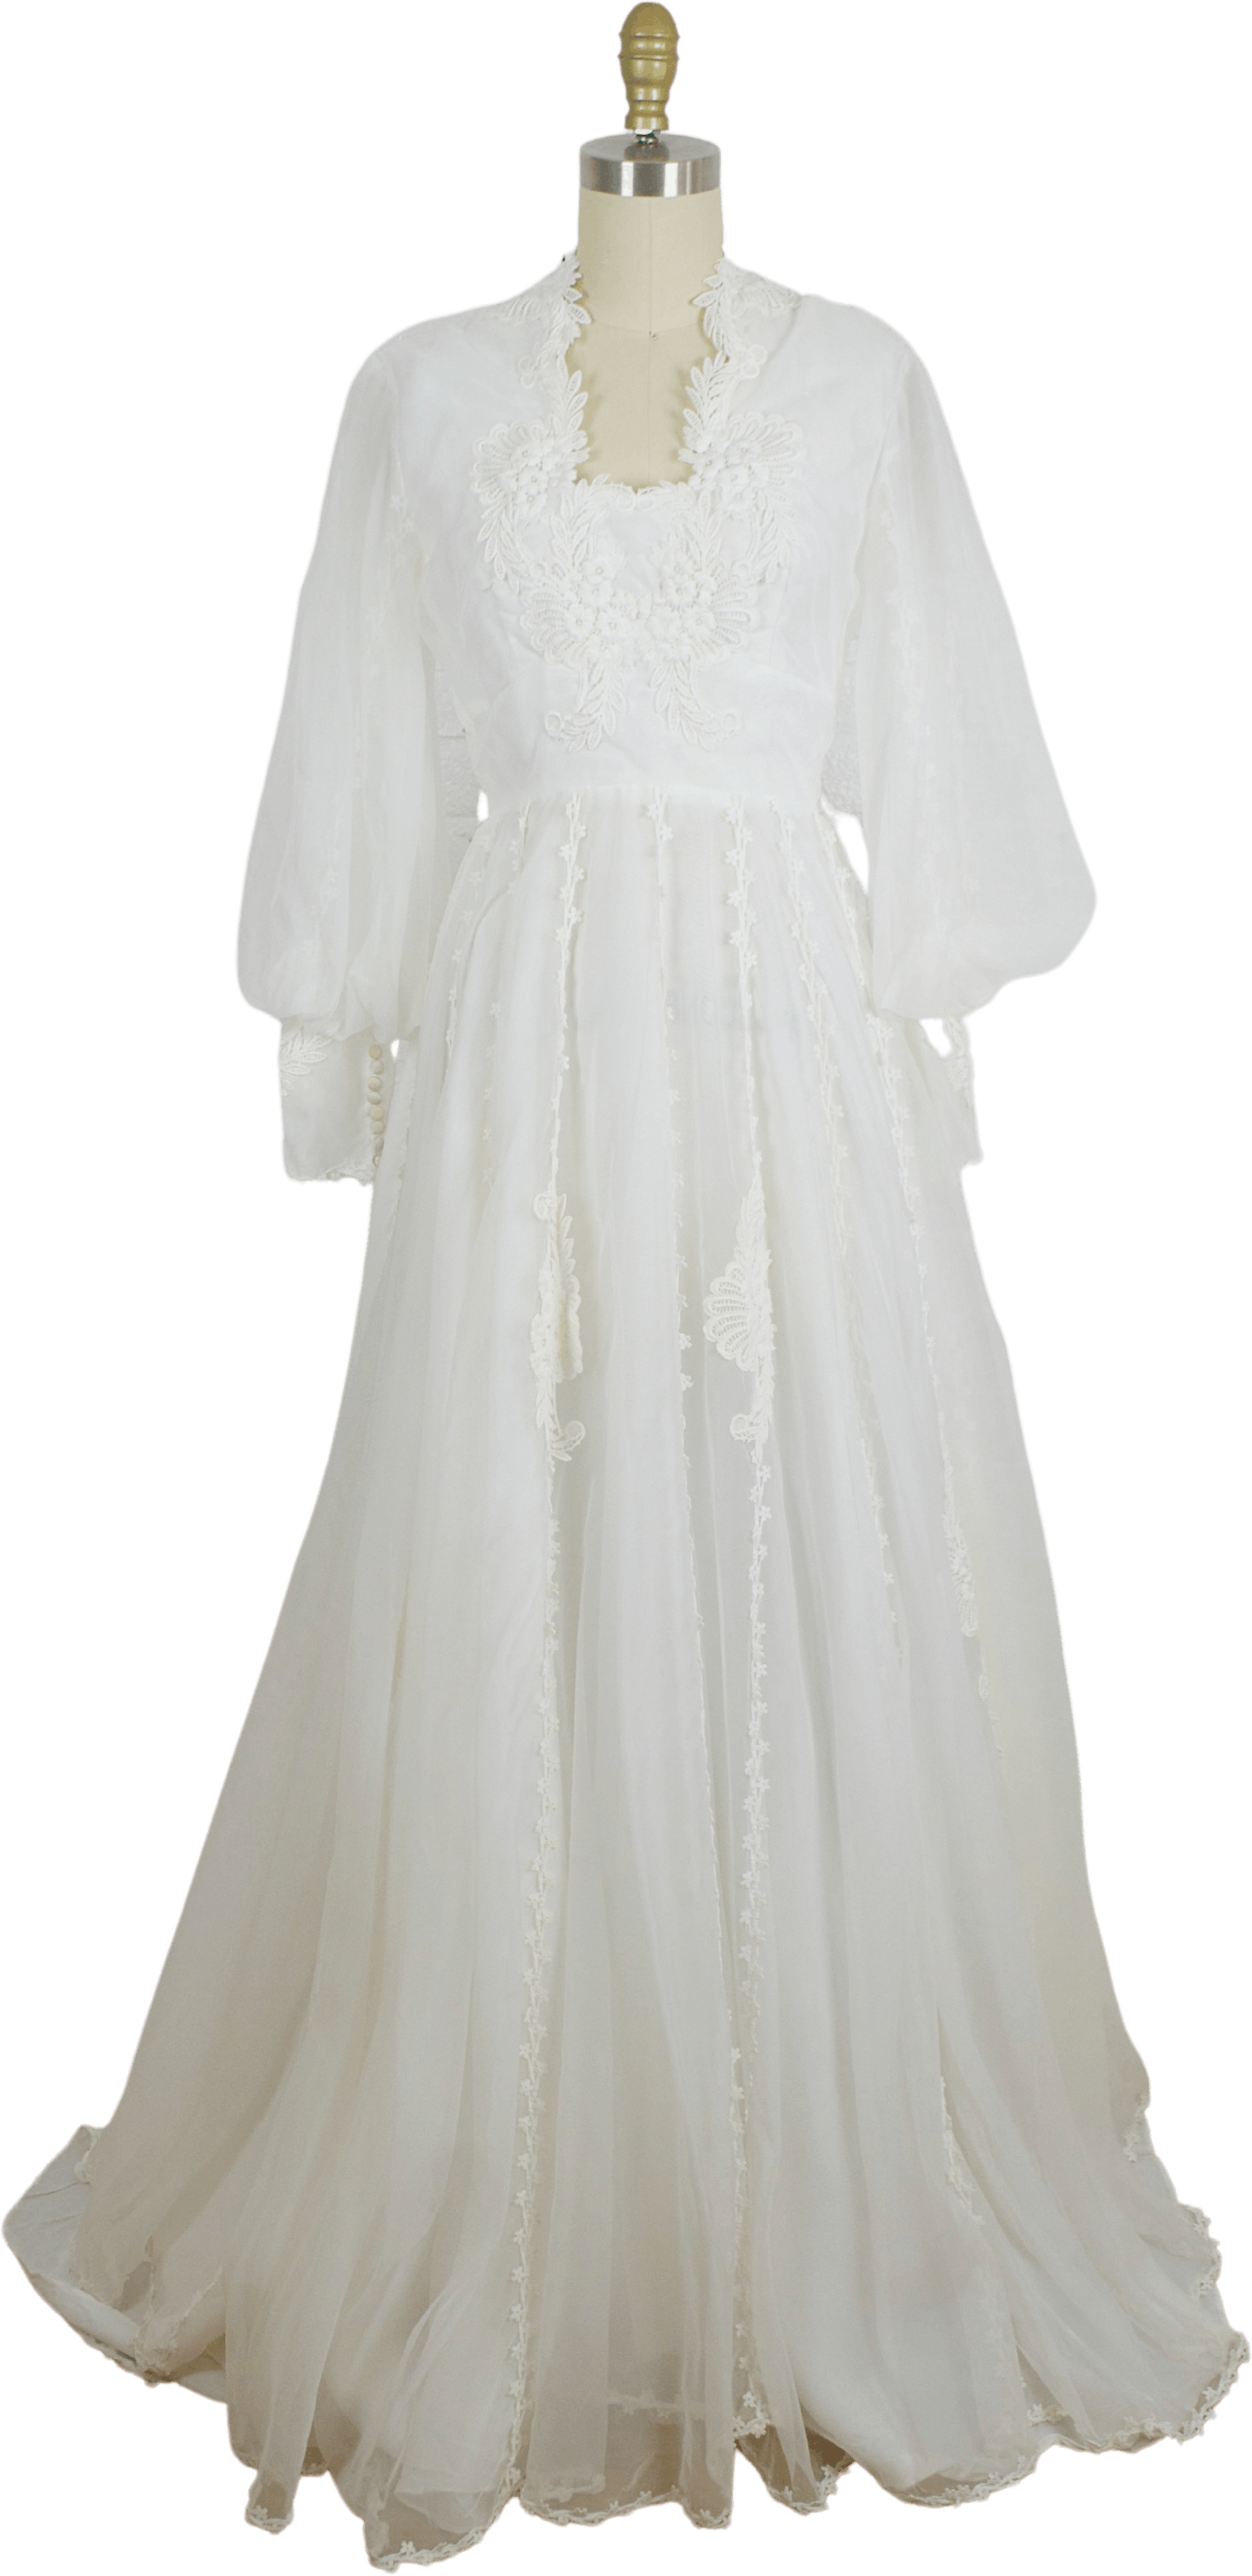 Vintage 70s Bohemian Lace Long Bishop Sleeve Wedding Dress With Long Train By Shop Thrilling 